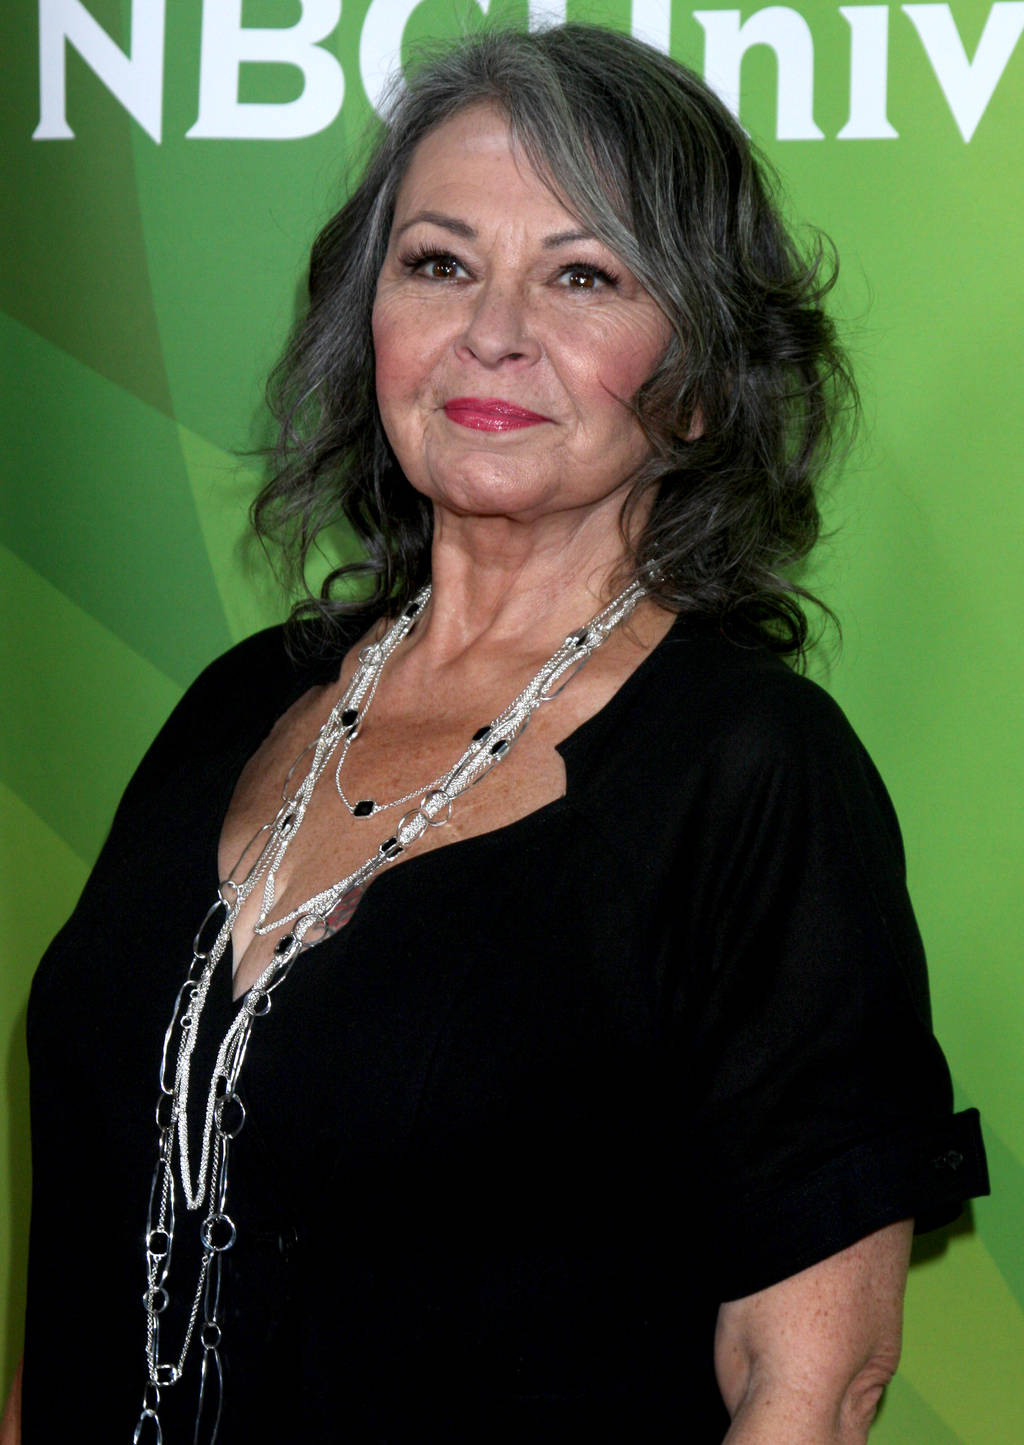 More Pictures Of Roseanne Barr. roseanne barr net worth. 